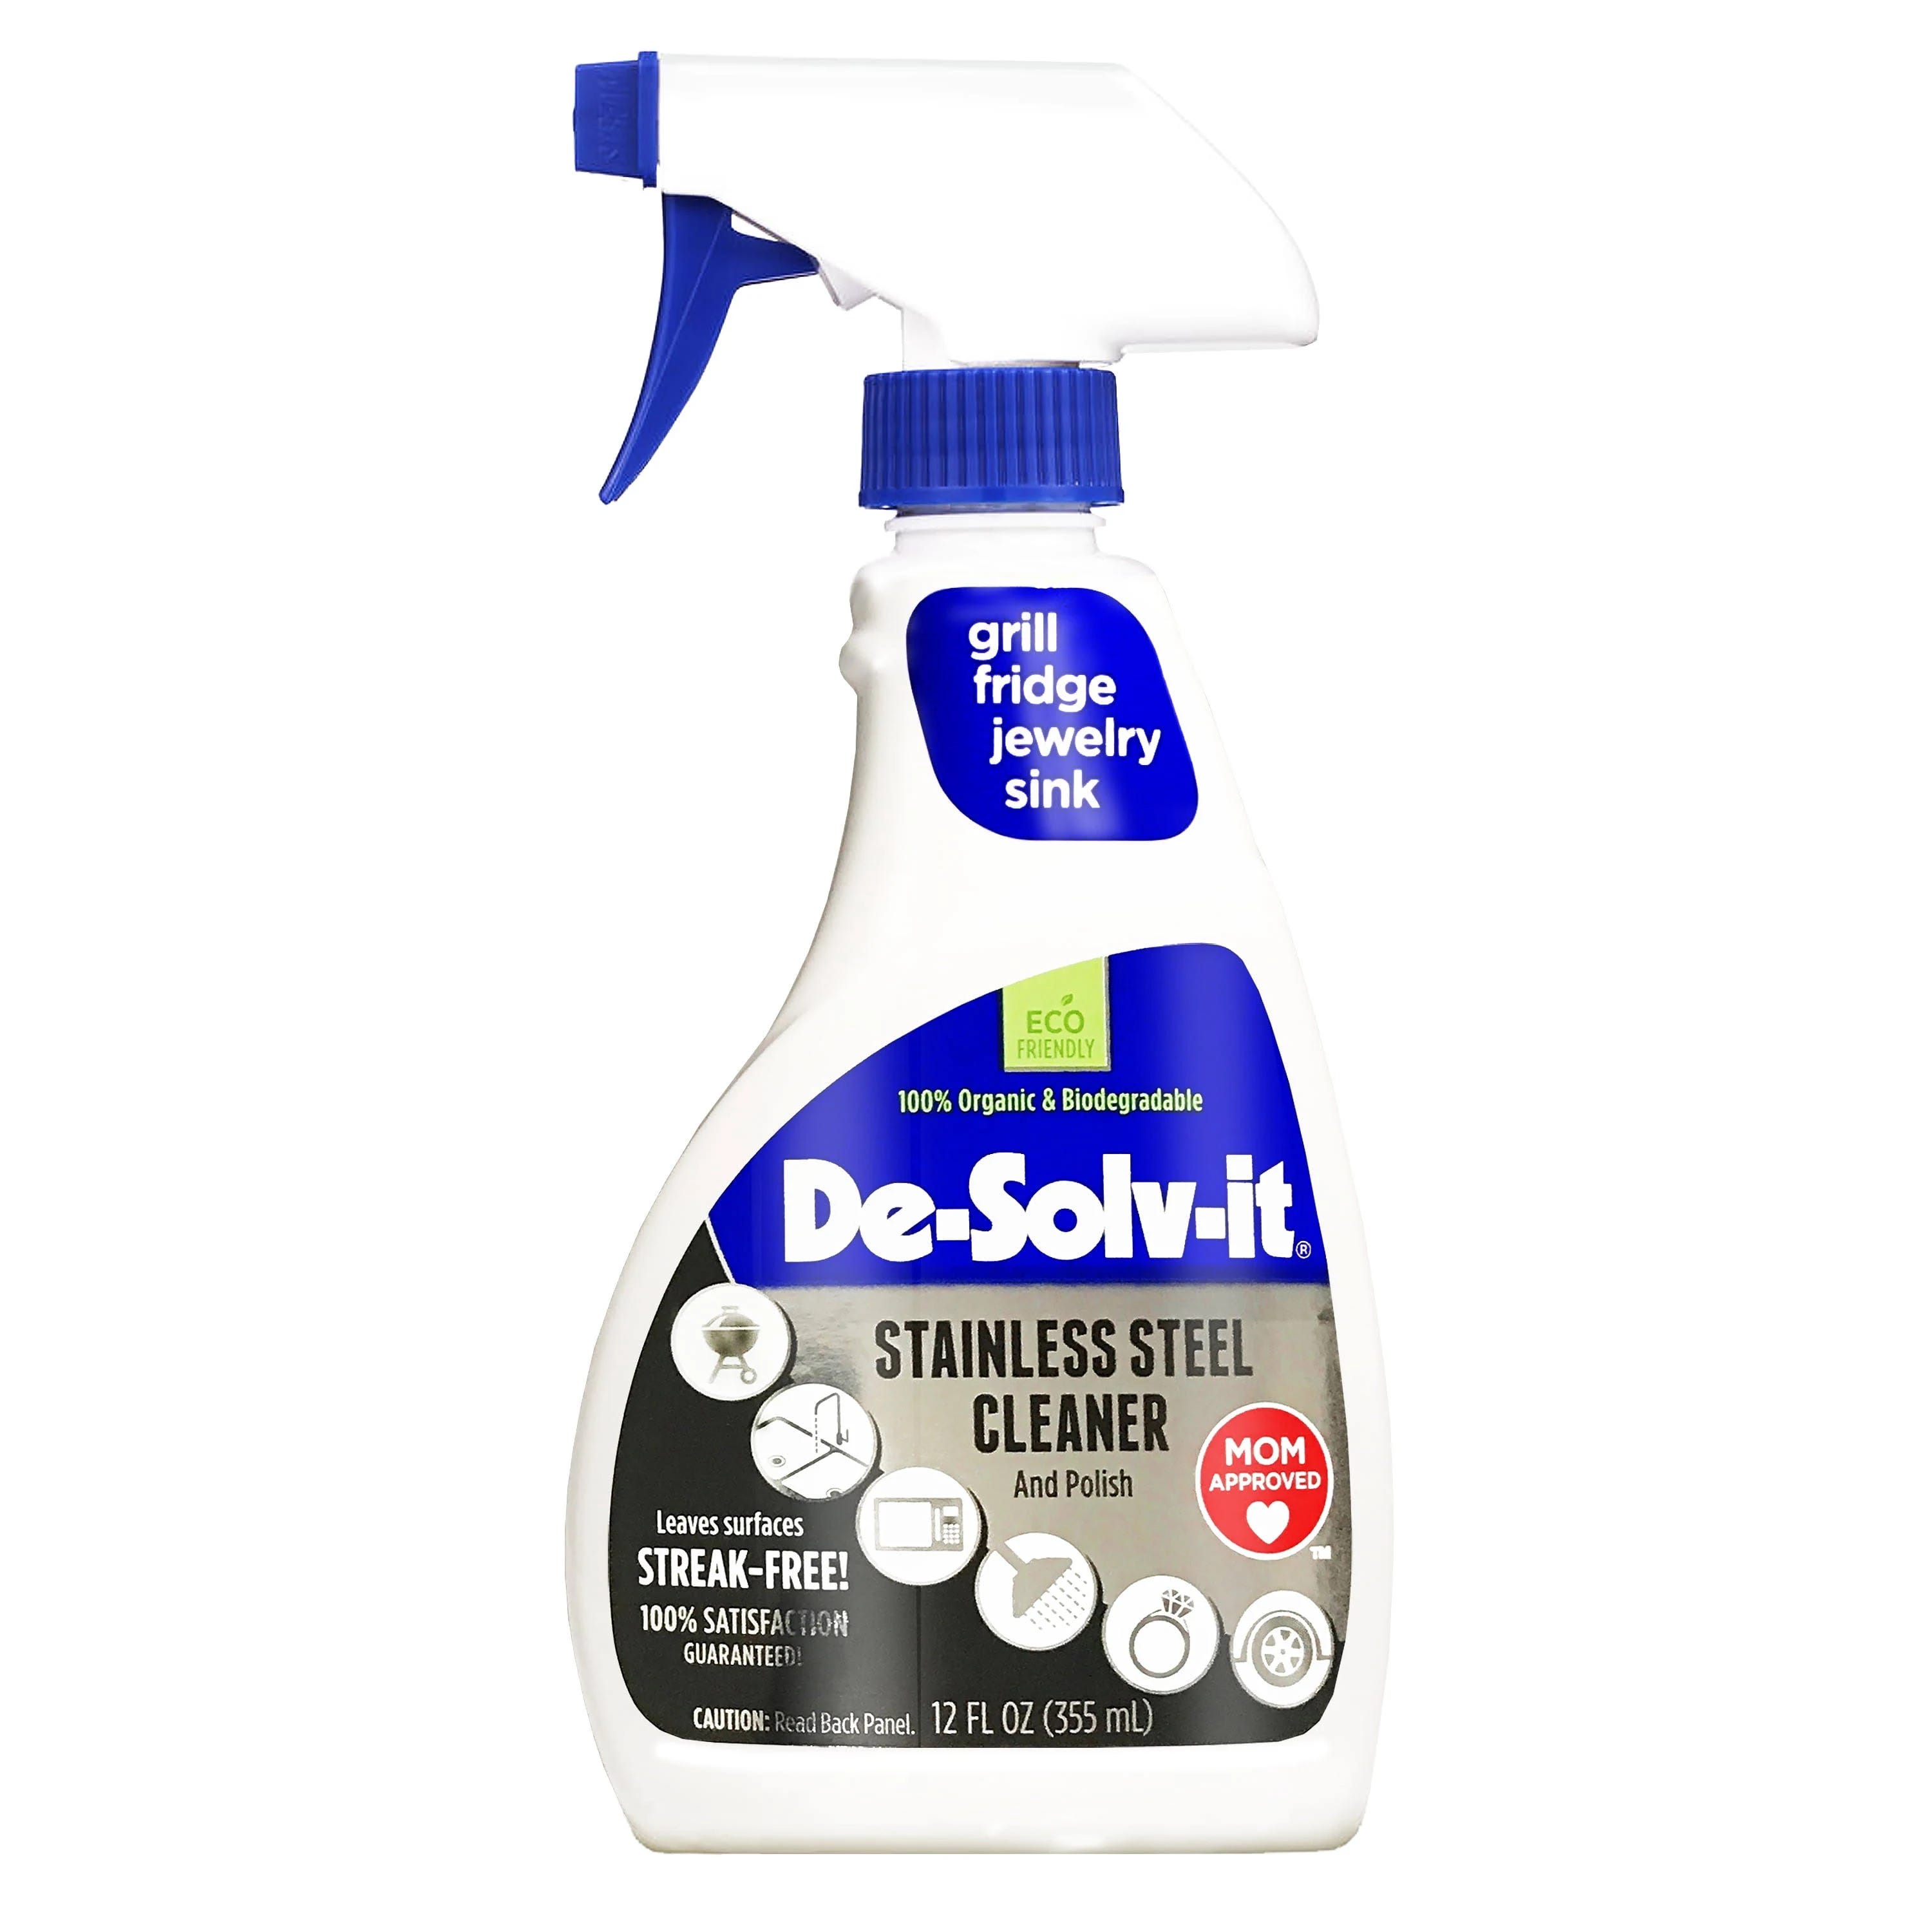 De-Solv-It Stainless Steel Cleaner for Spotless Shining Surfaces | Image